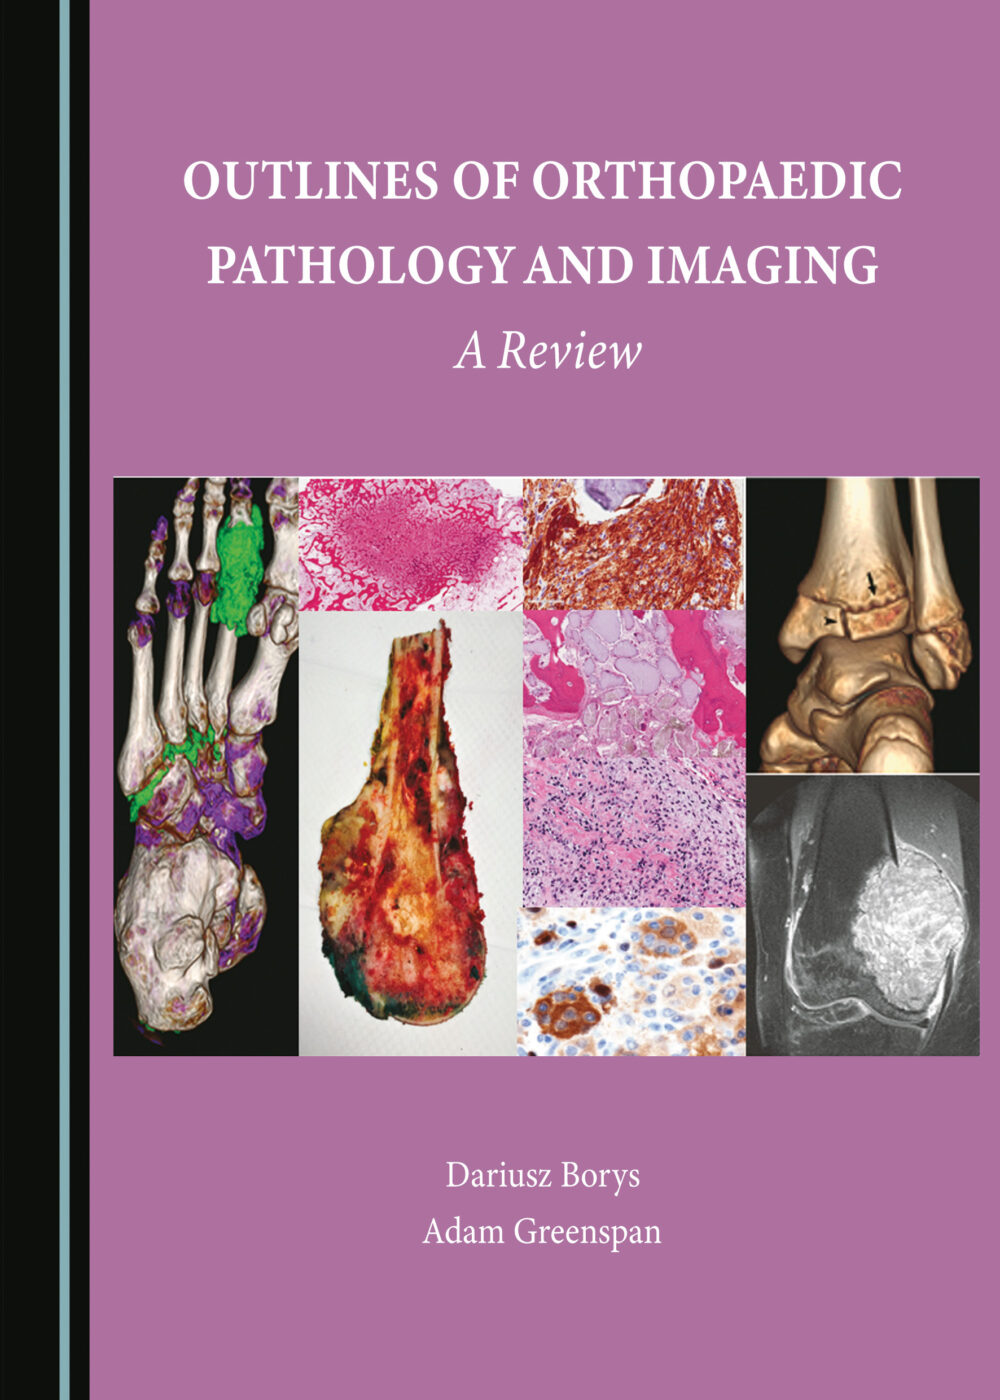 Outlines of Orthopaedic Pathology and Imaging A Review